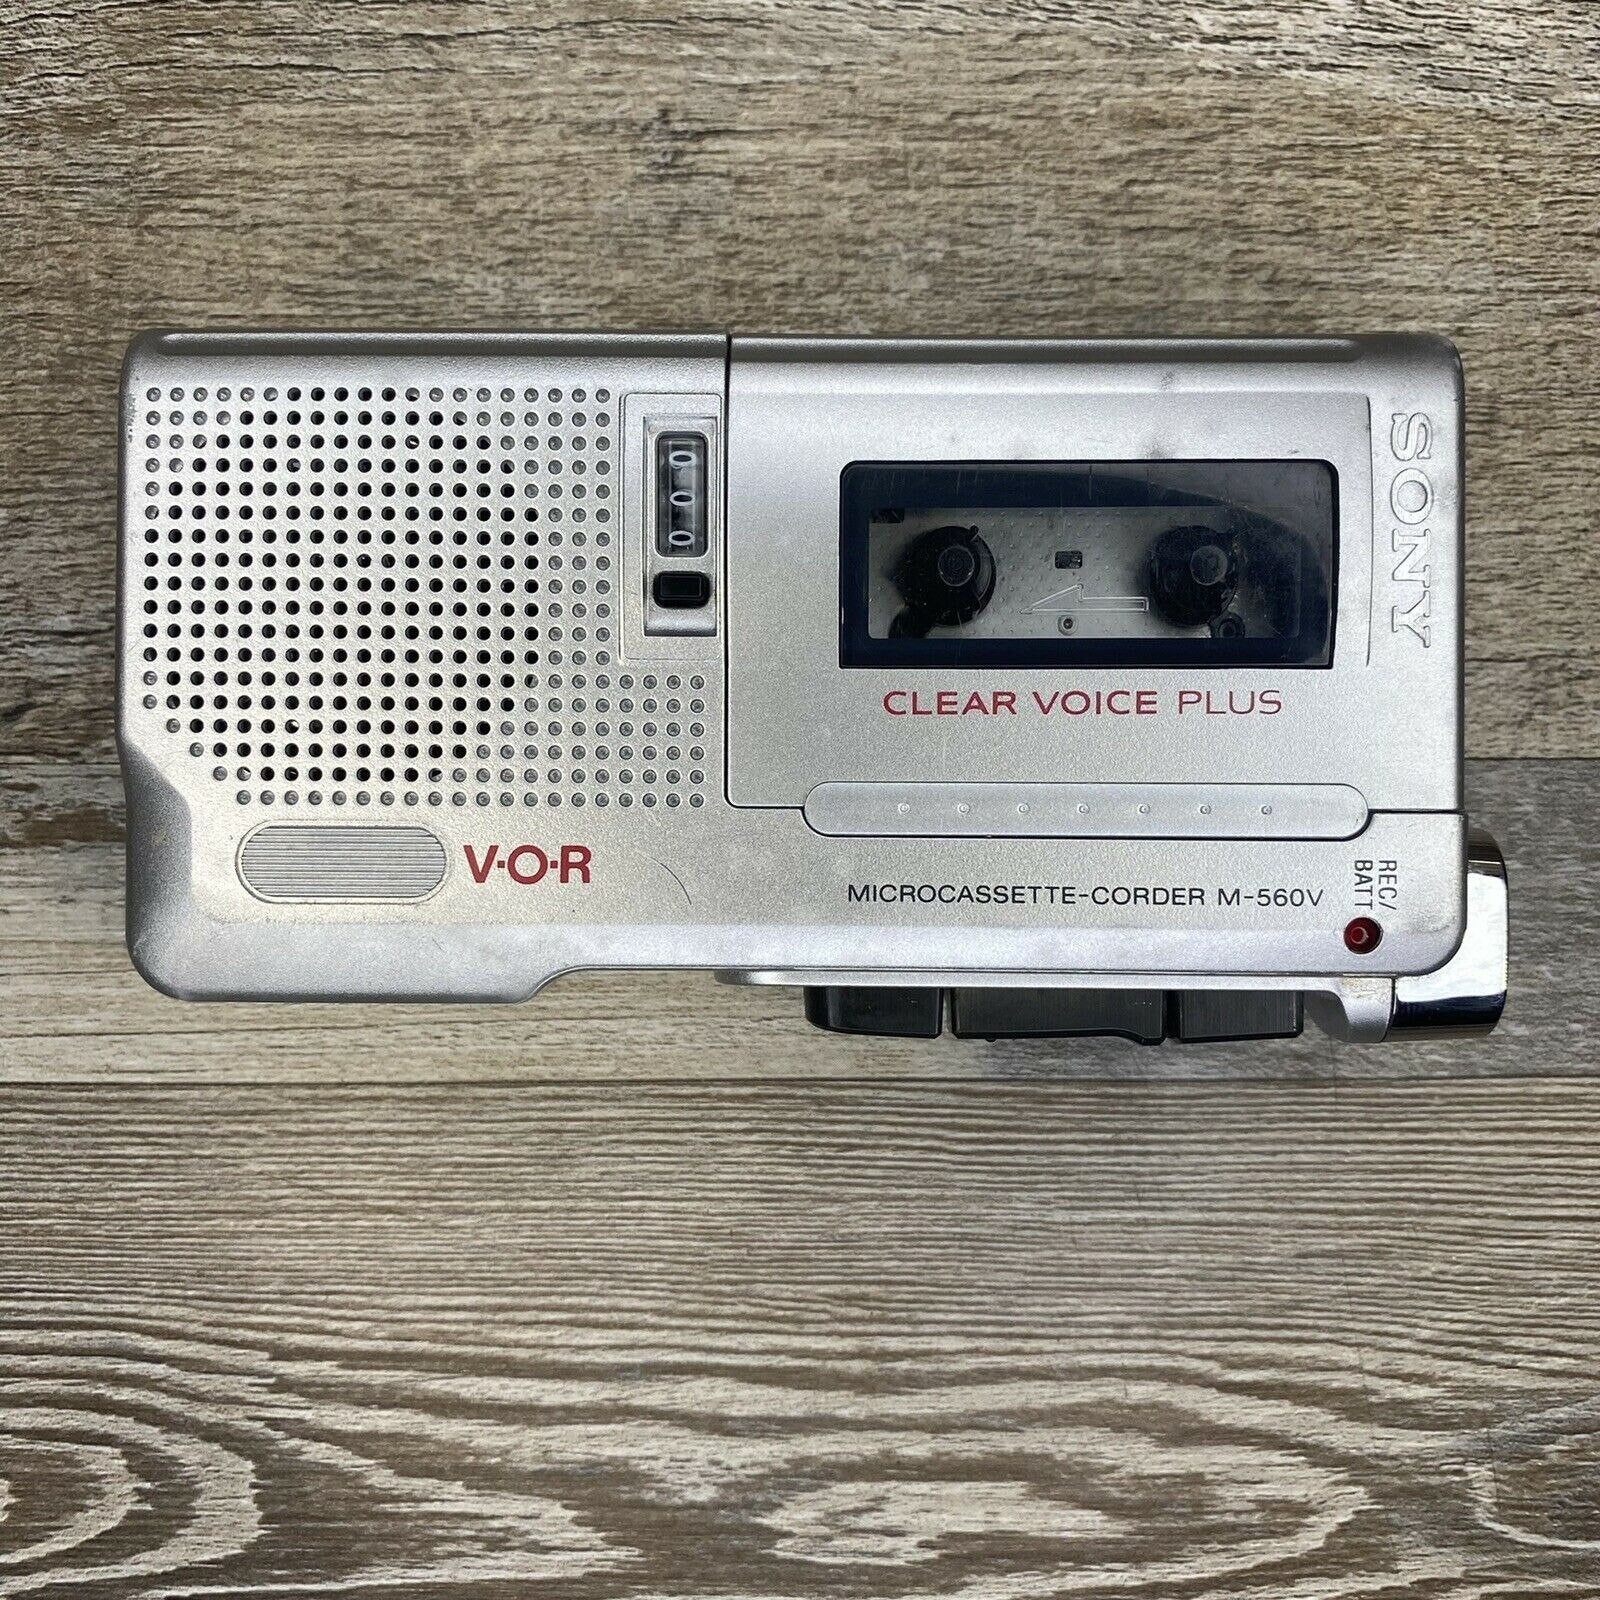 Sony Clear Voice Plus M-560V Microcassette Recorder